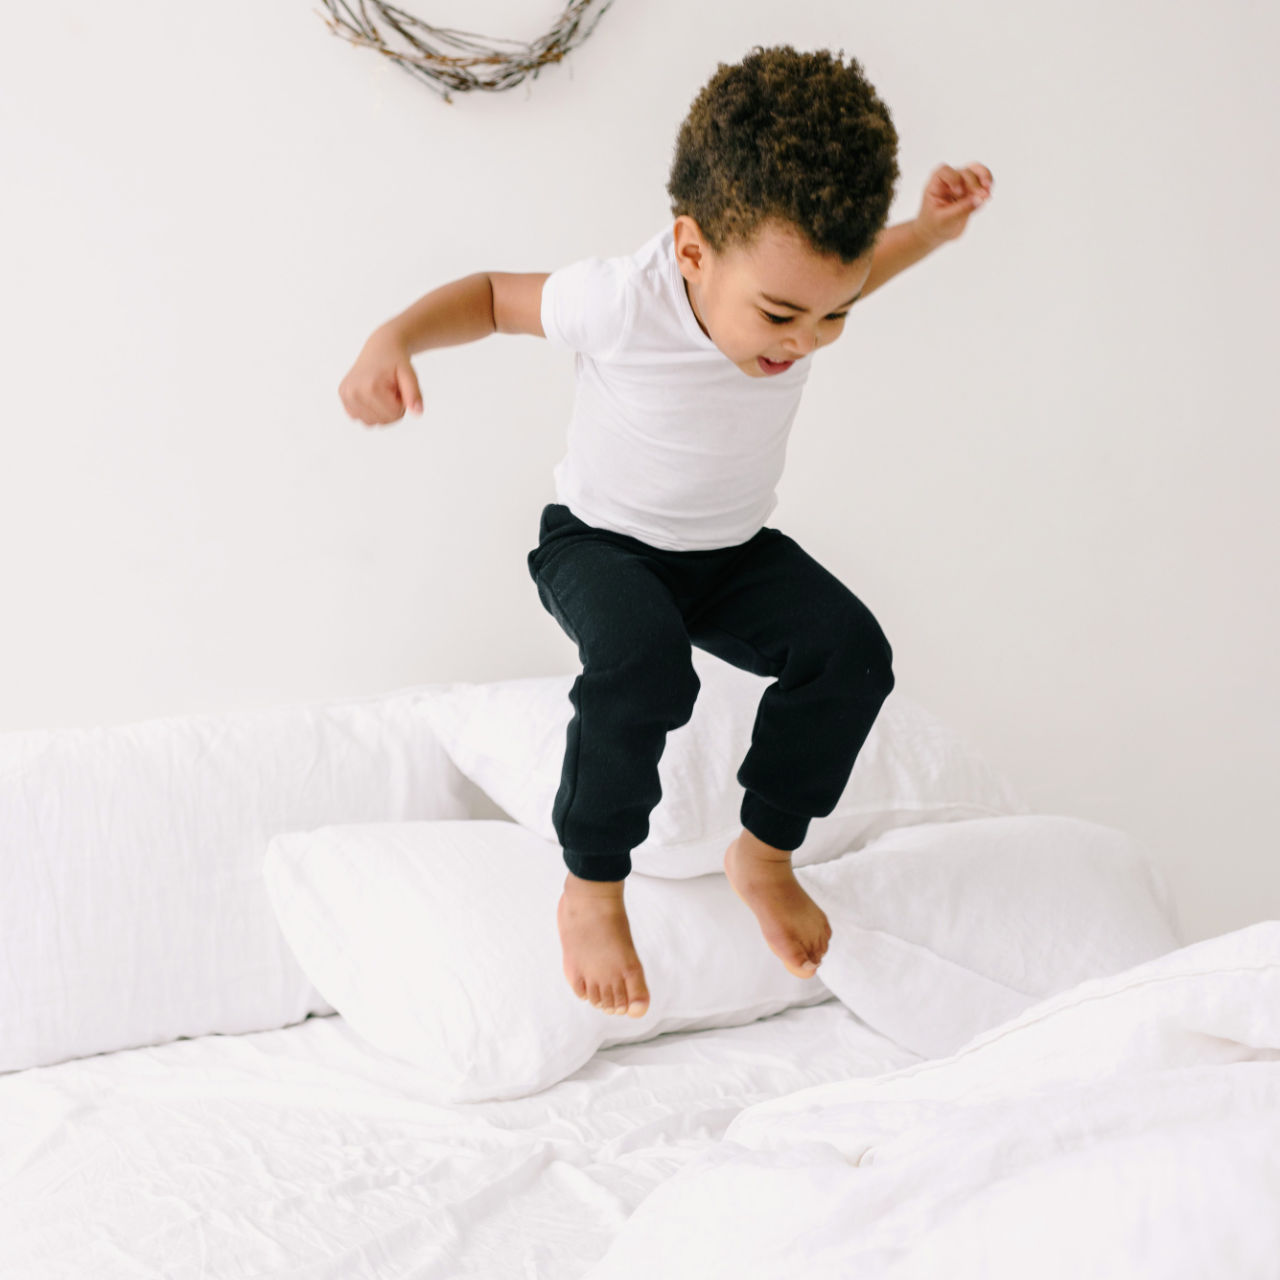 A boy jumping happily on a white bed.